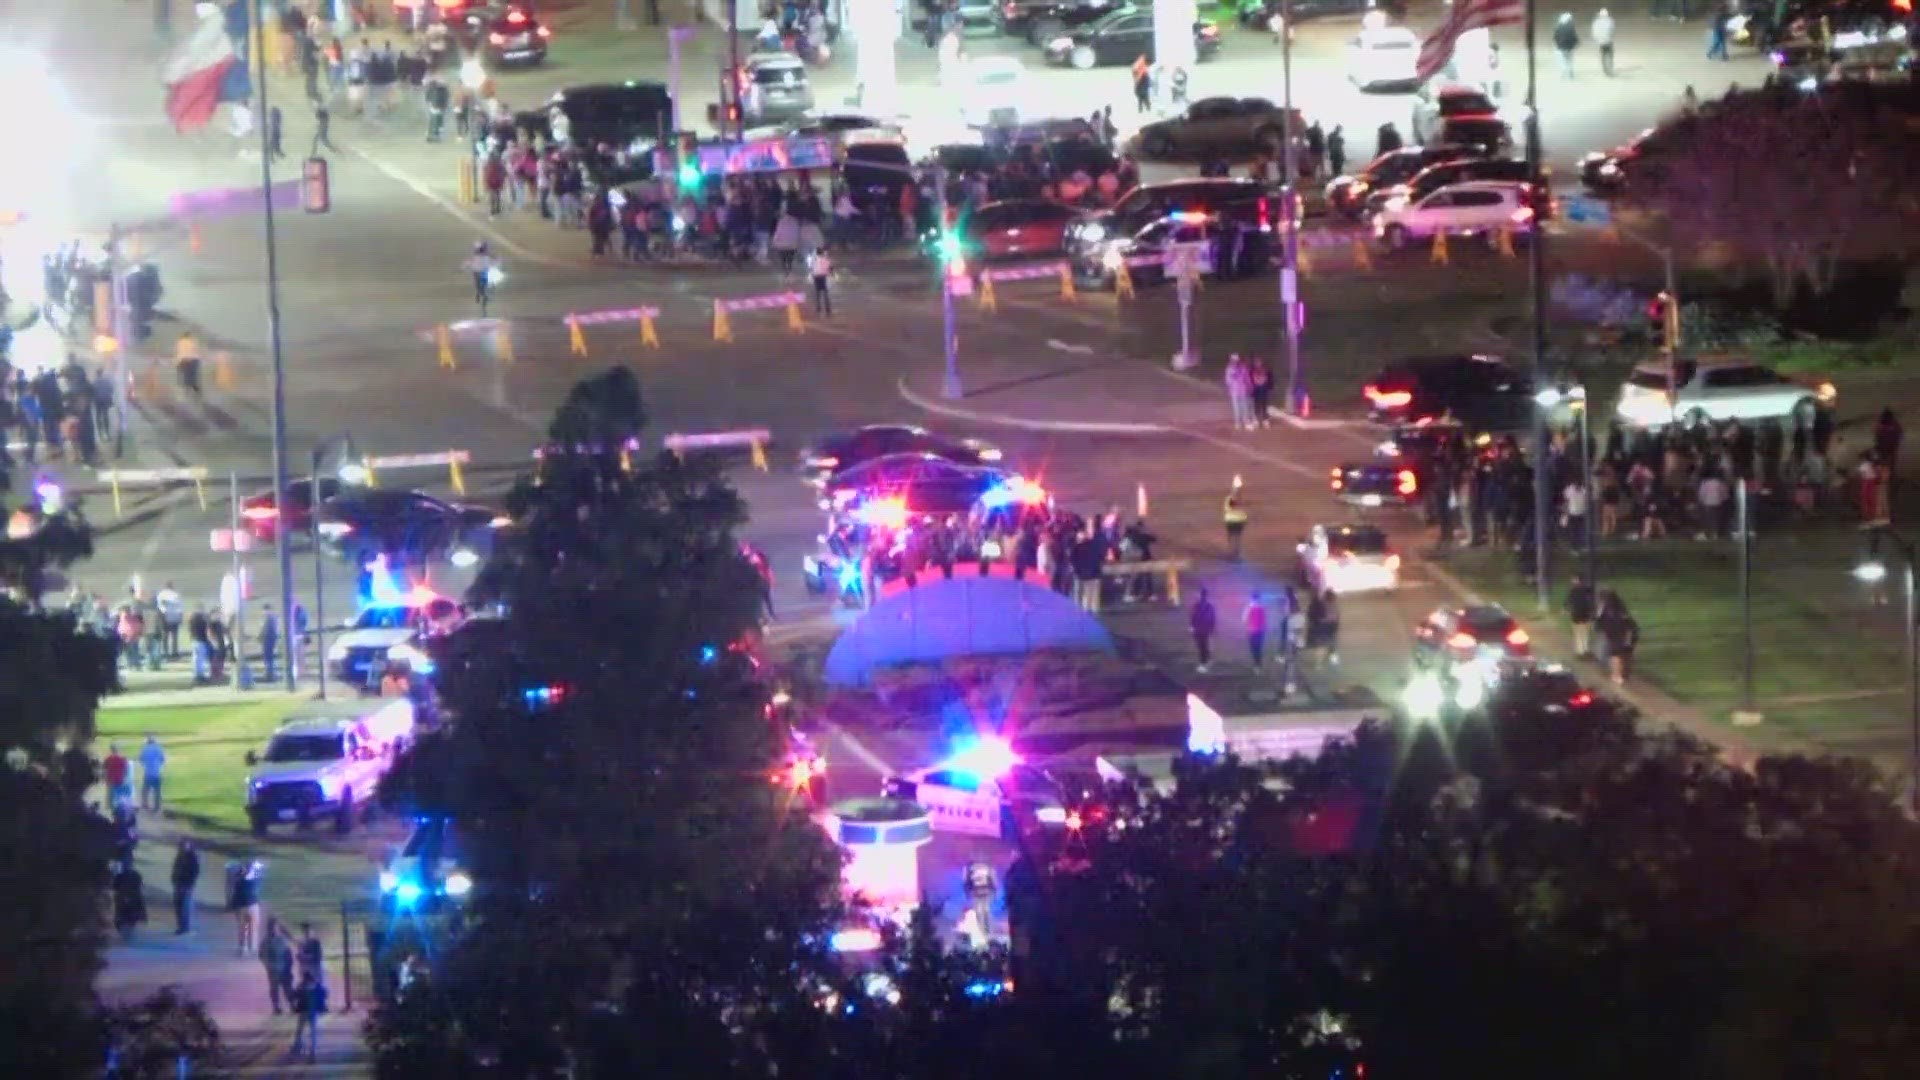 Police say fallen light caused report of shots fired at VA mall